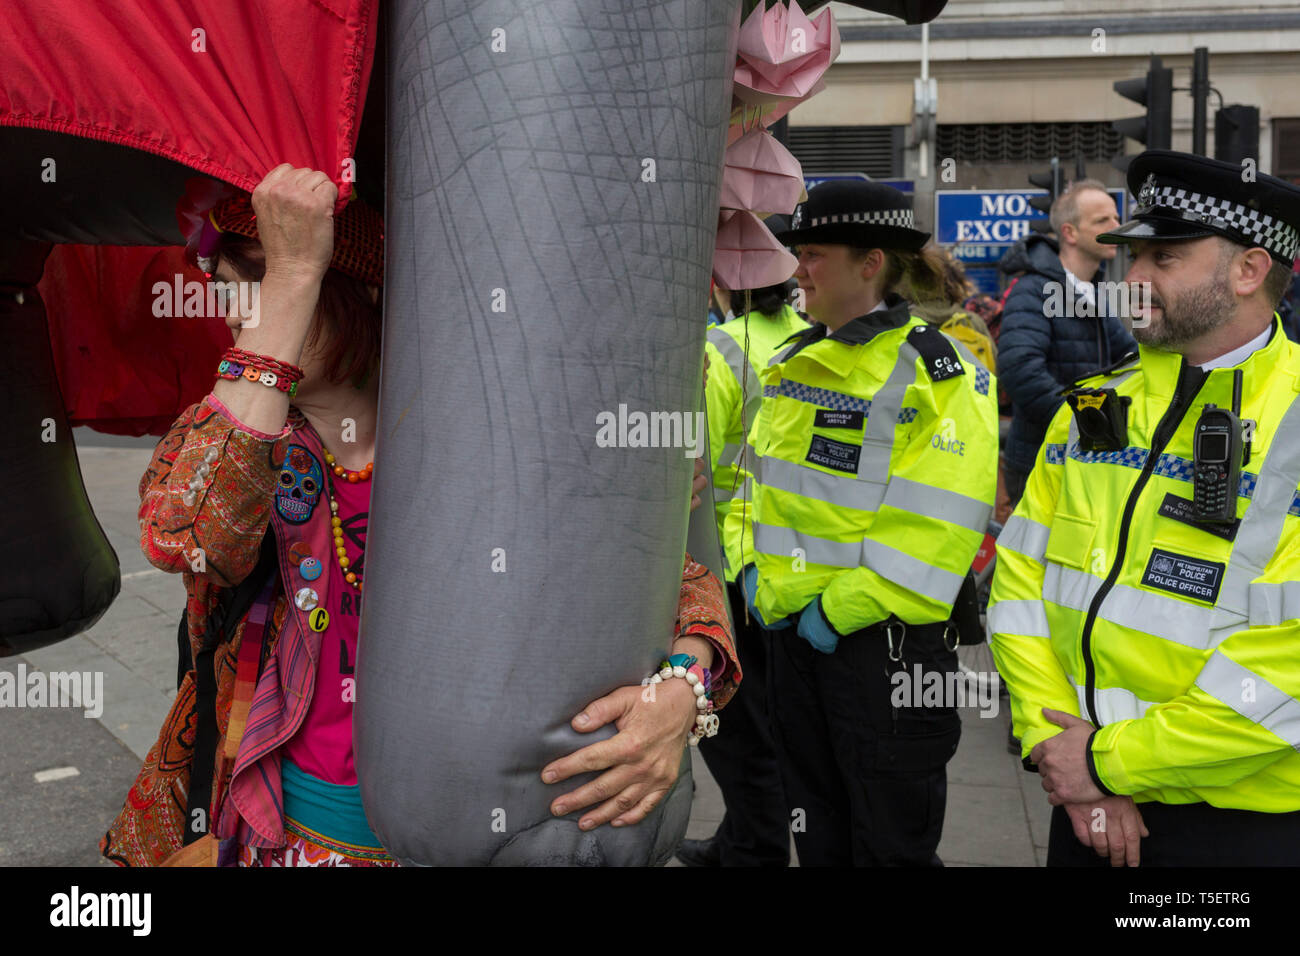 On the 10th consecutive day of protests around London by the climate change campaign Extinction Rebellion, a large inflatable elephant allows humour among protesters and police officers, on 24th April 2019, at Marble Arch, London England. Stock Photo